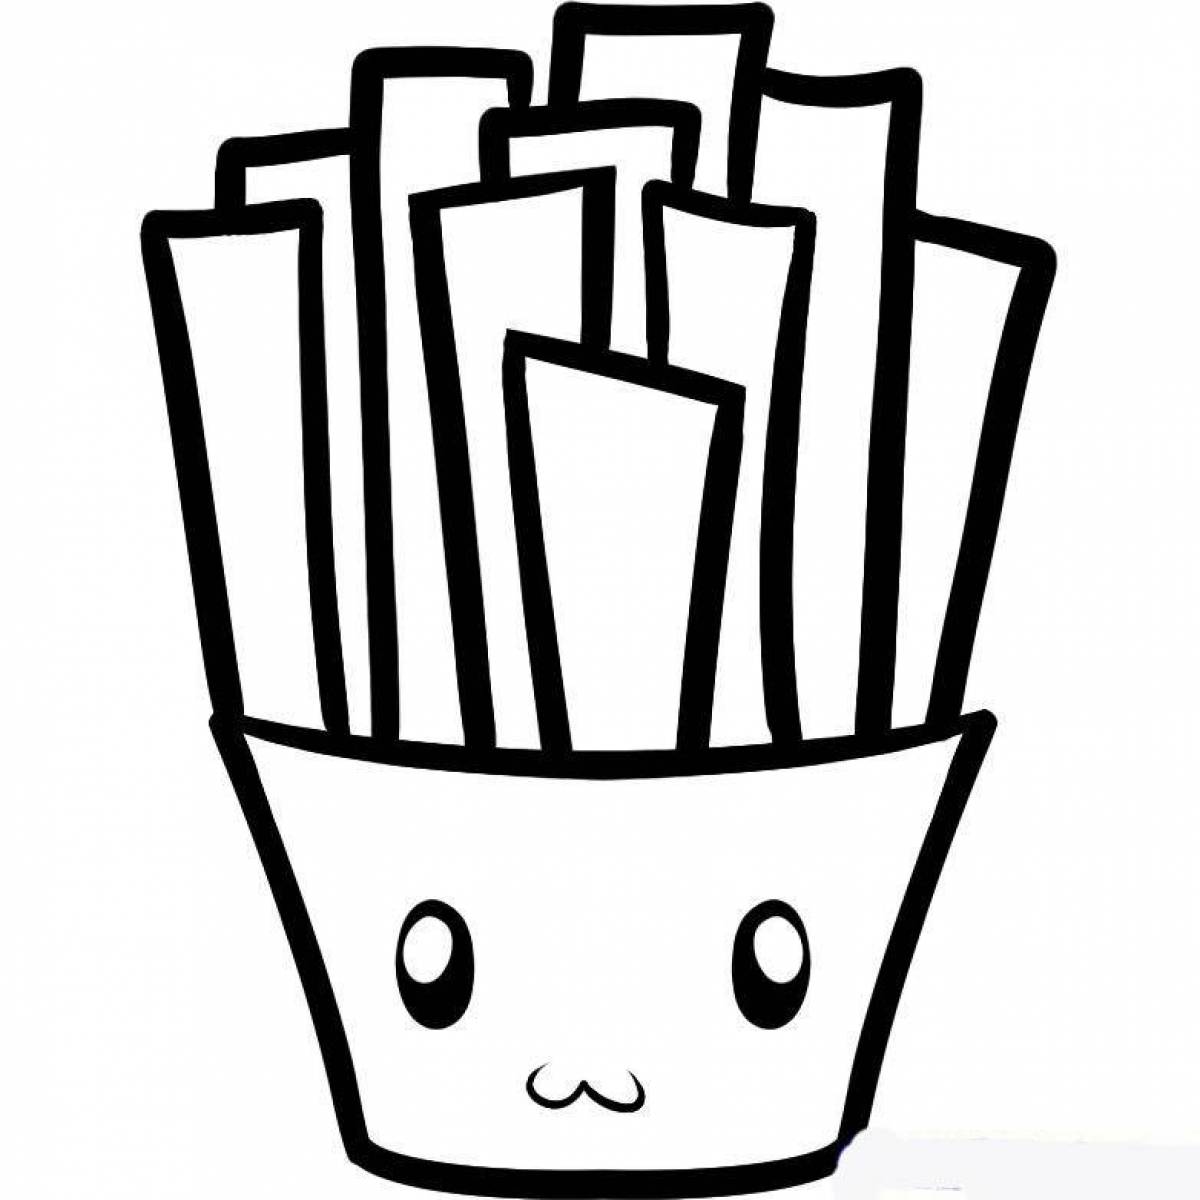 Coloring page for french fries with stink